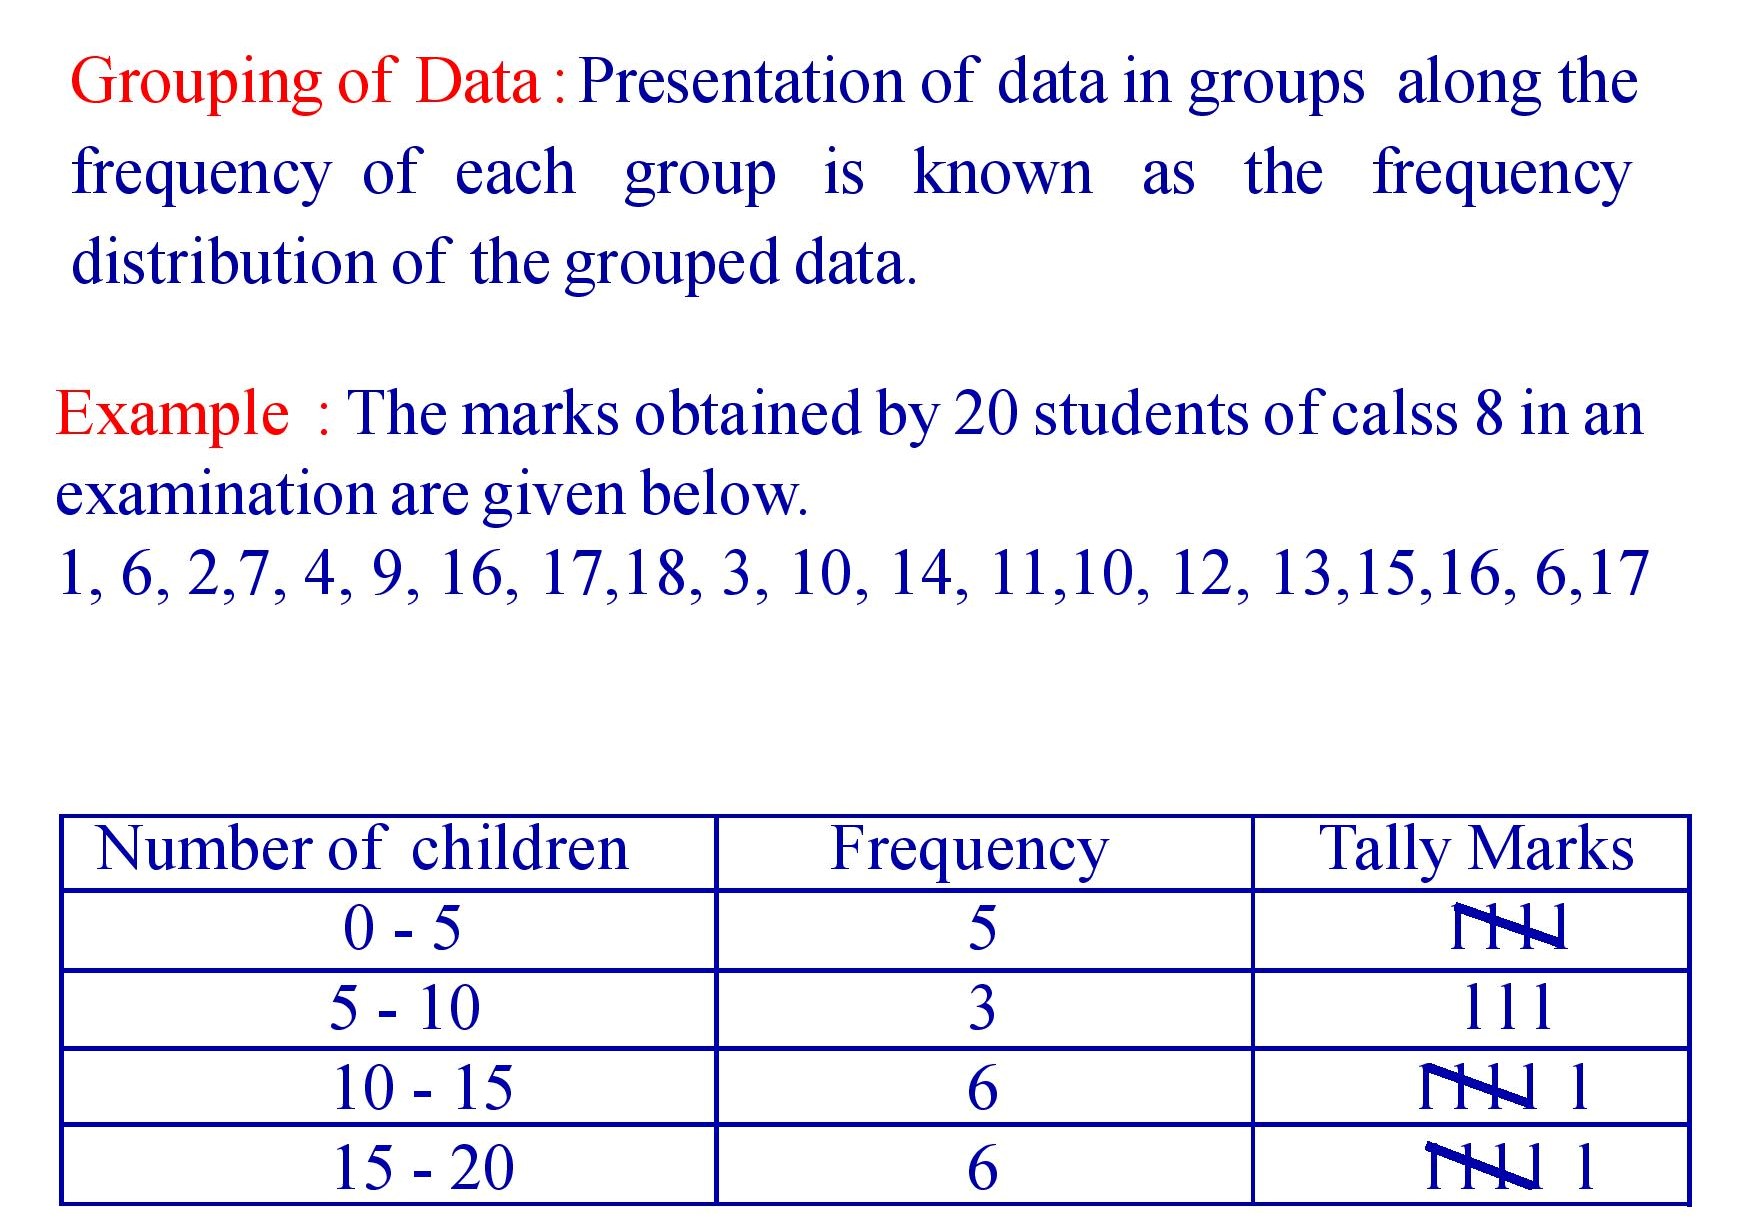 Grouping of Data